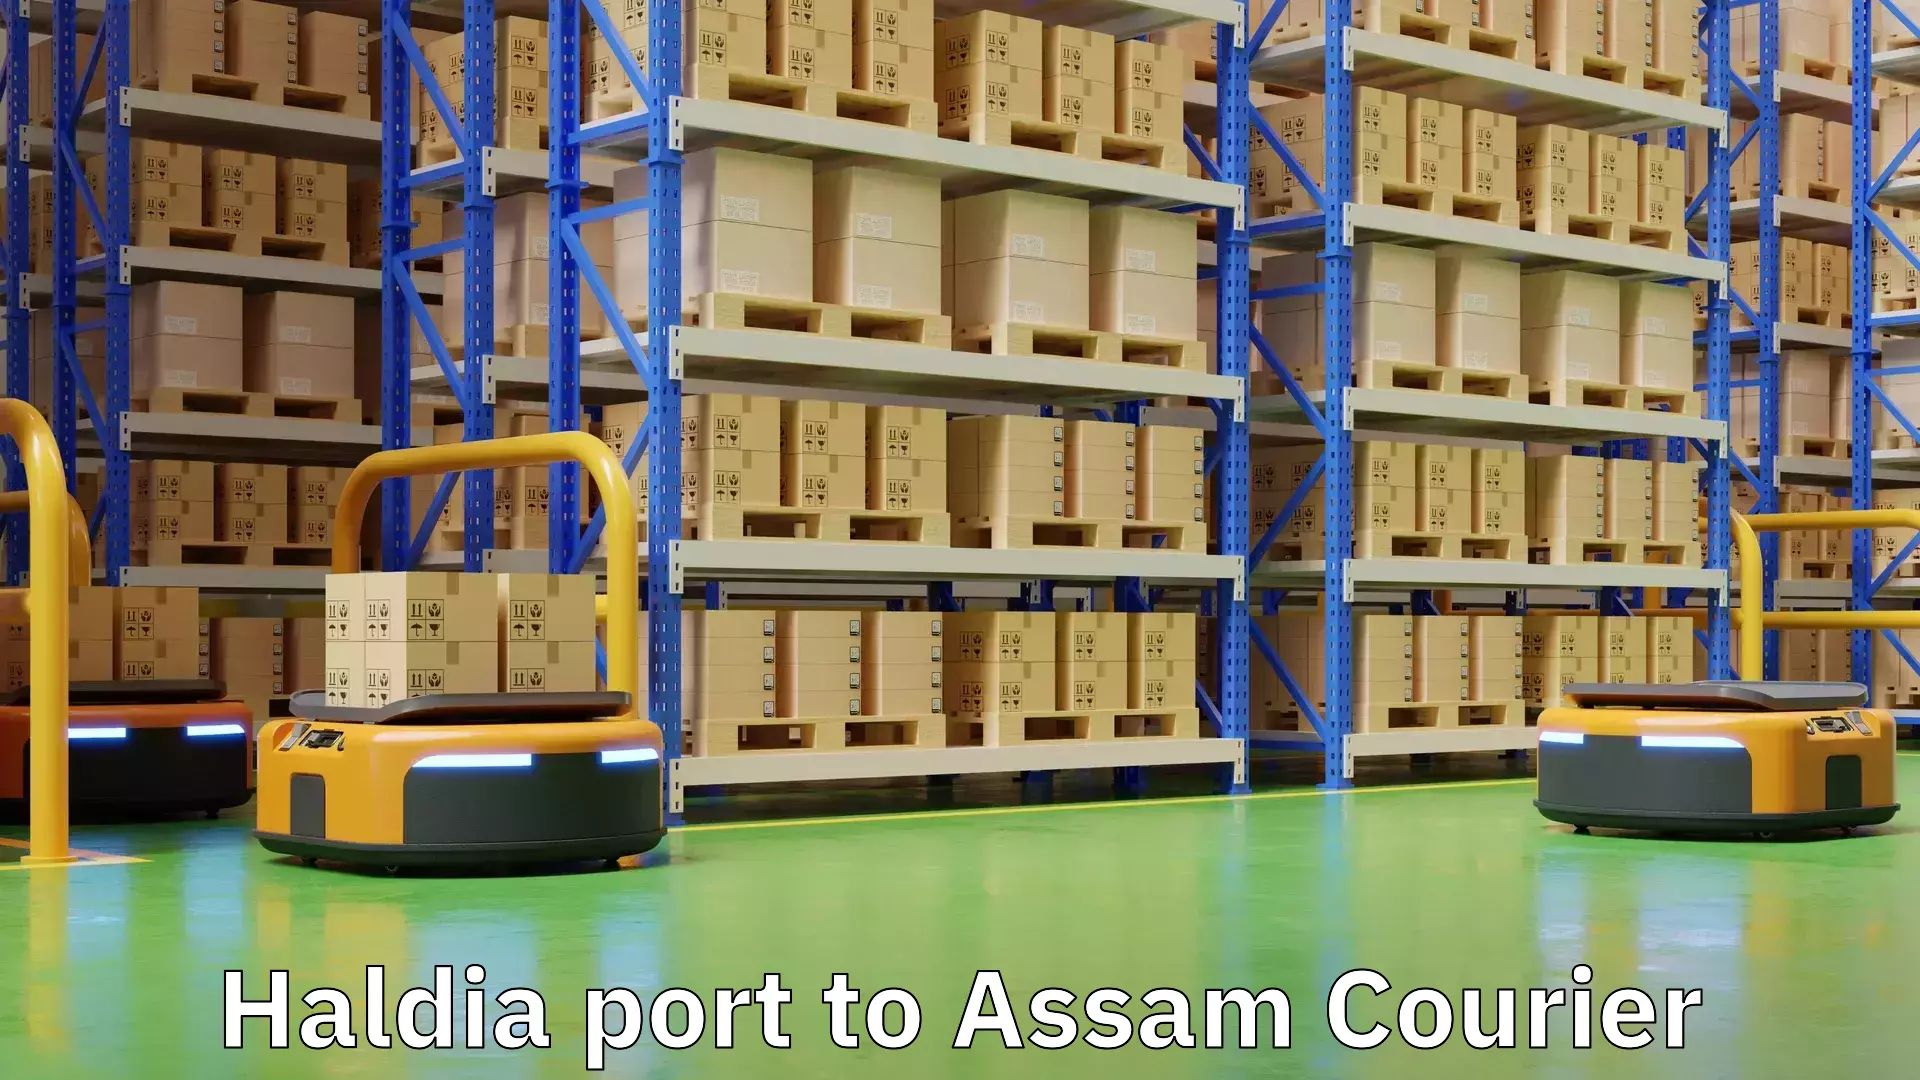 Nationwide shipping services Haldia port to Assam